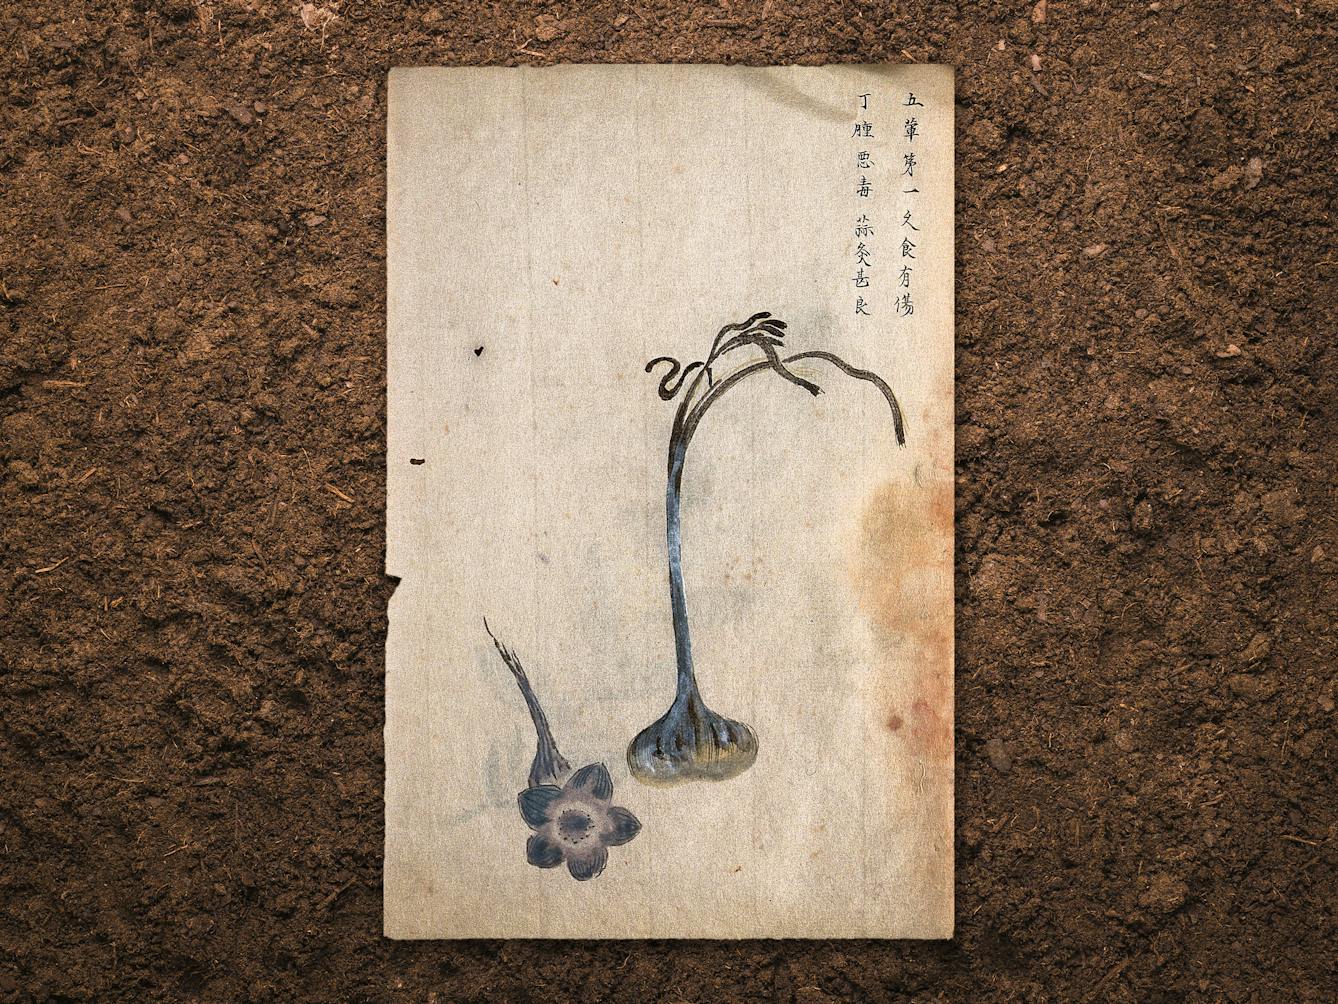 Digital composite image of a botanical drawing resting slightly above a brown earth background, casting a subtle shadow. The drawing shows the bulb, leaves and separate flower of the garlic plant. To the top right of the drawing is lettering in black ink in Chinese script.